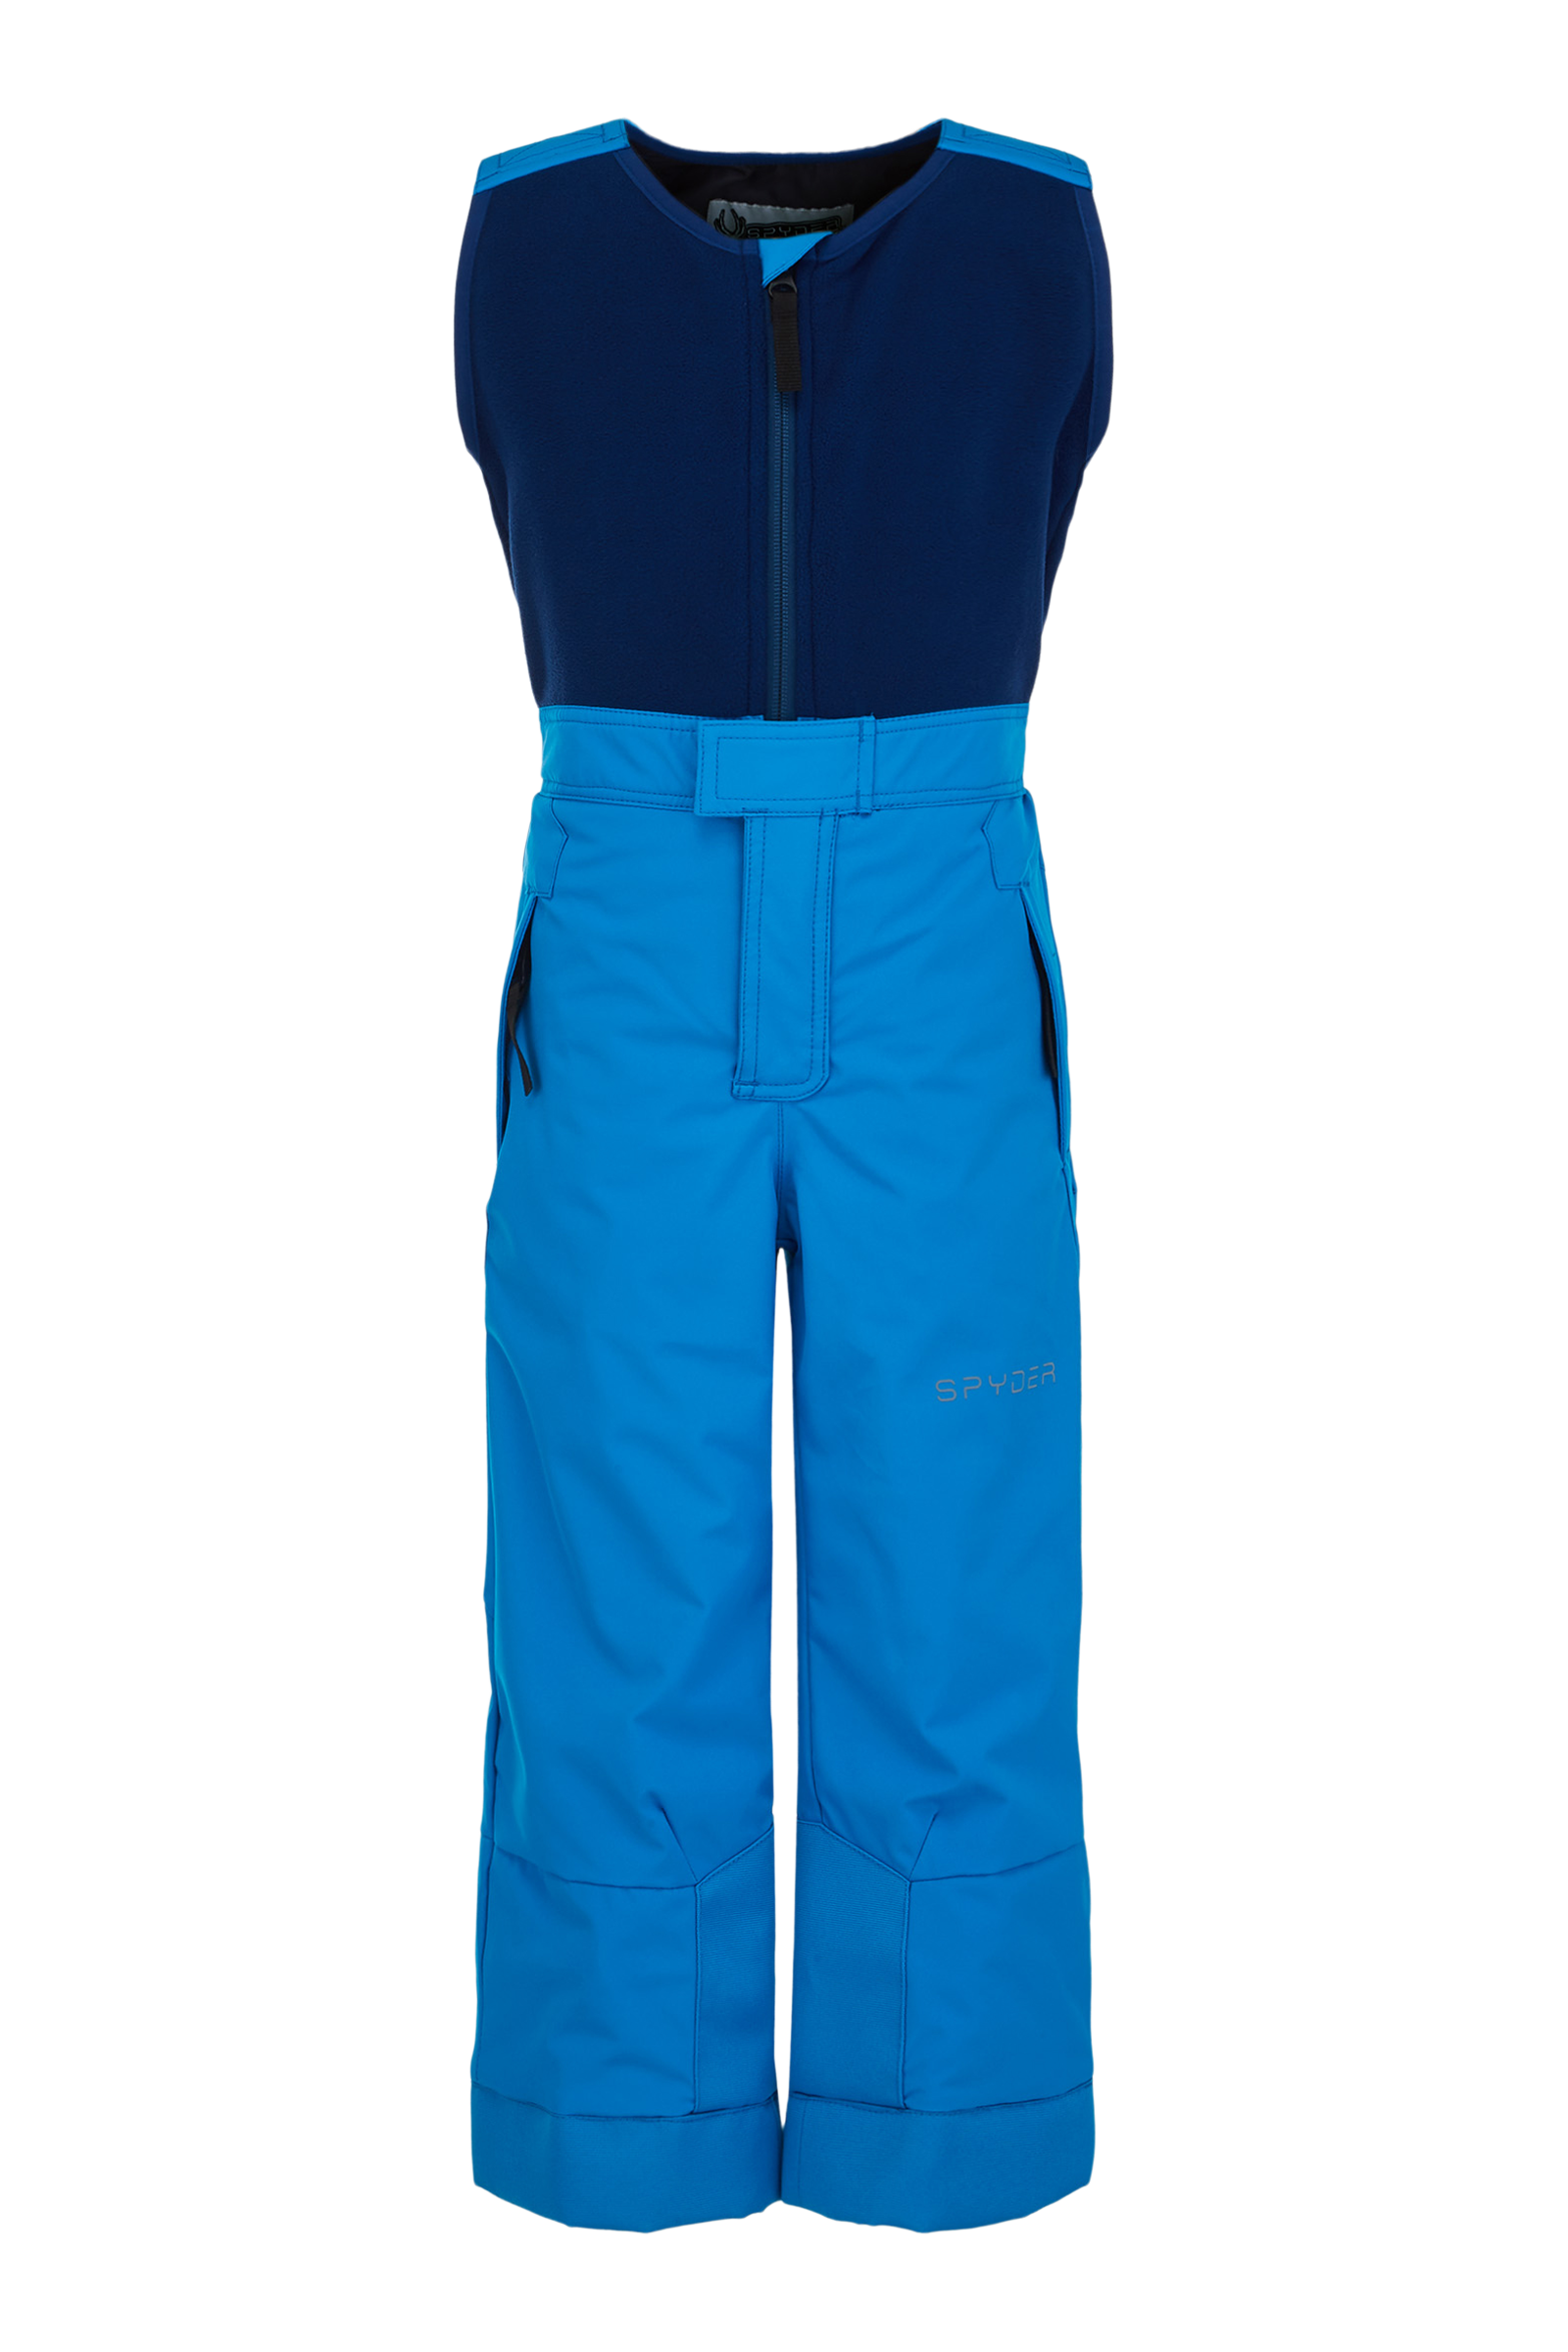 Spyder Boys' Expedition Pant - Winter 2021/2022